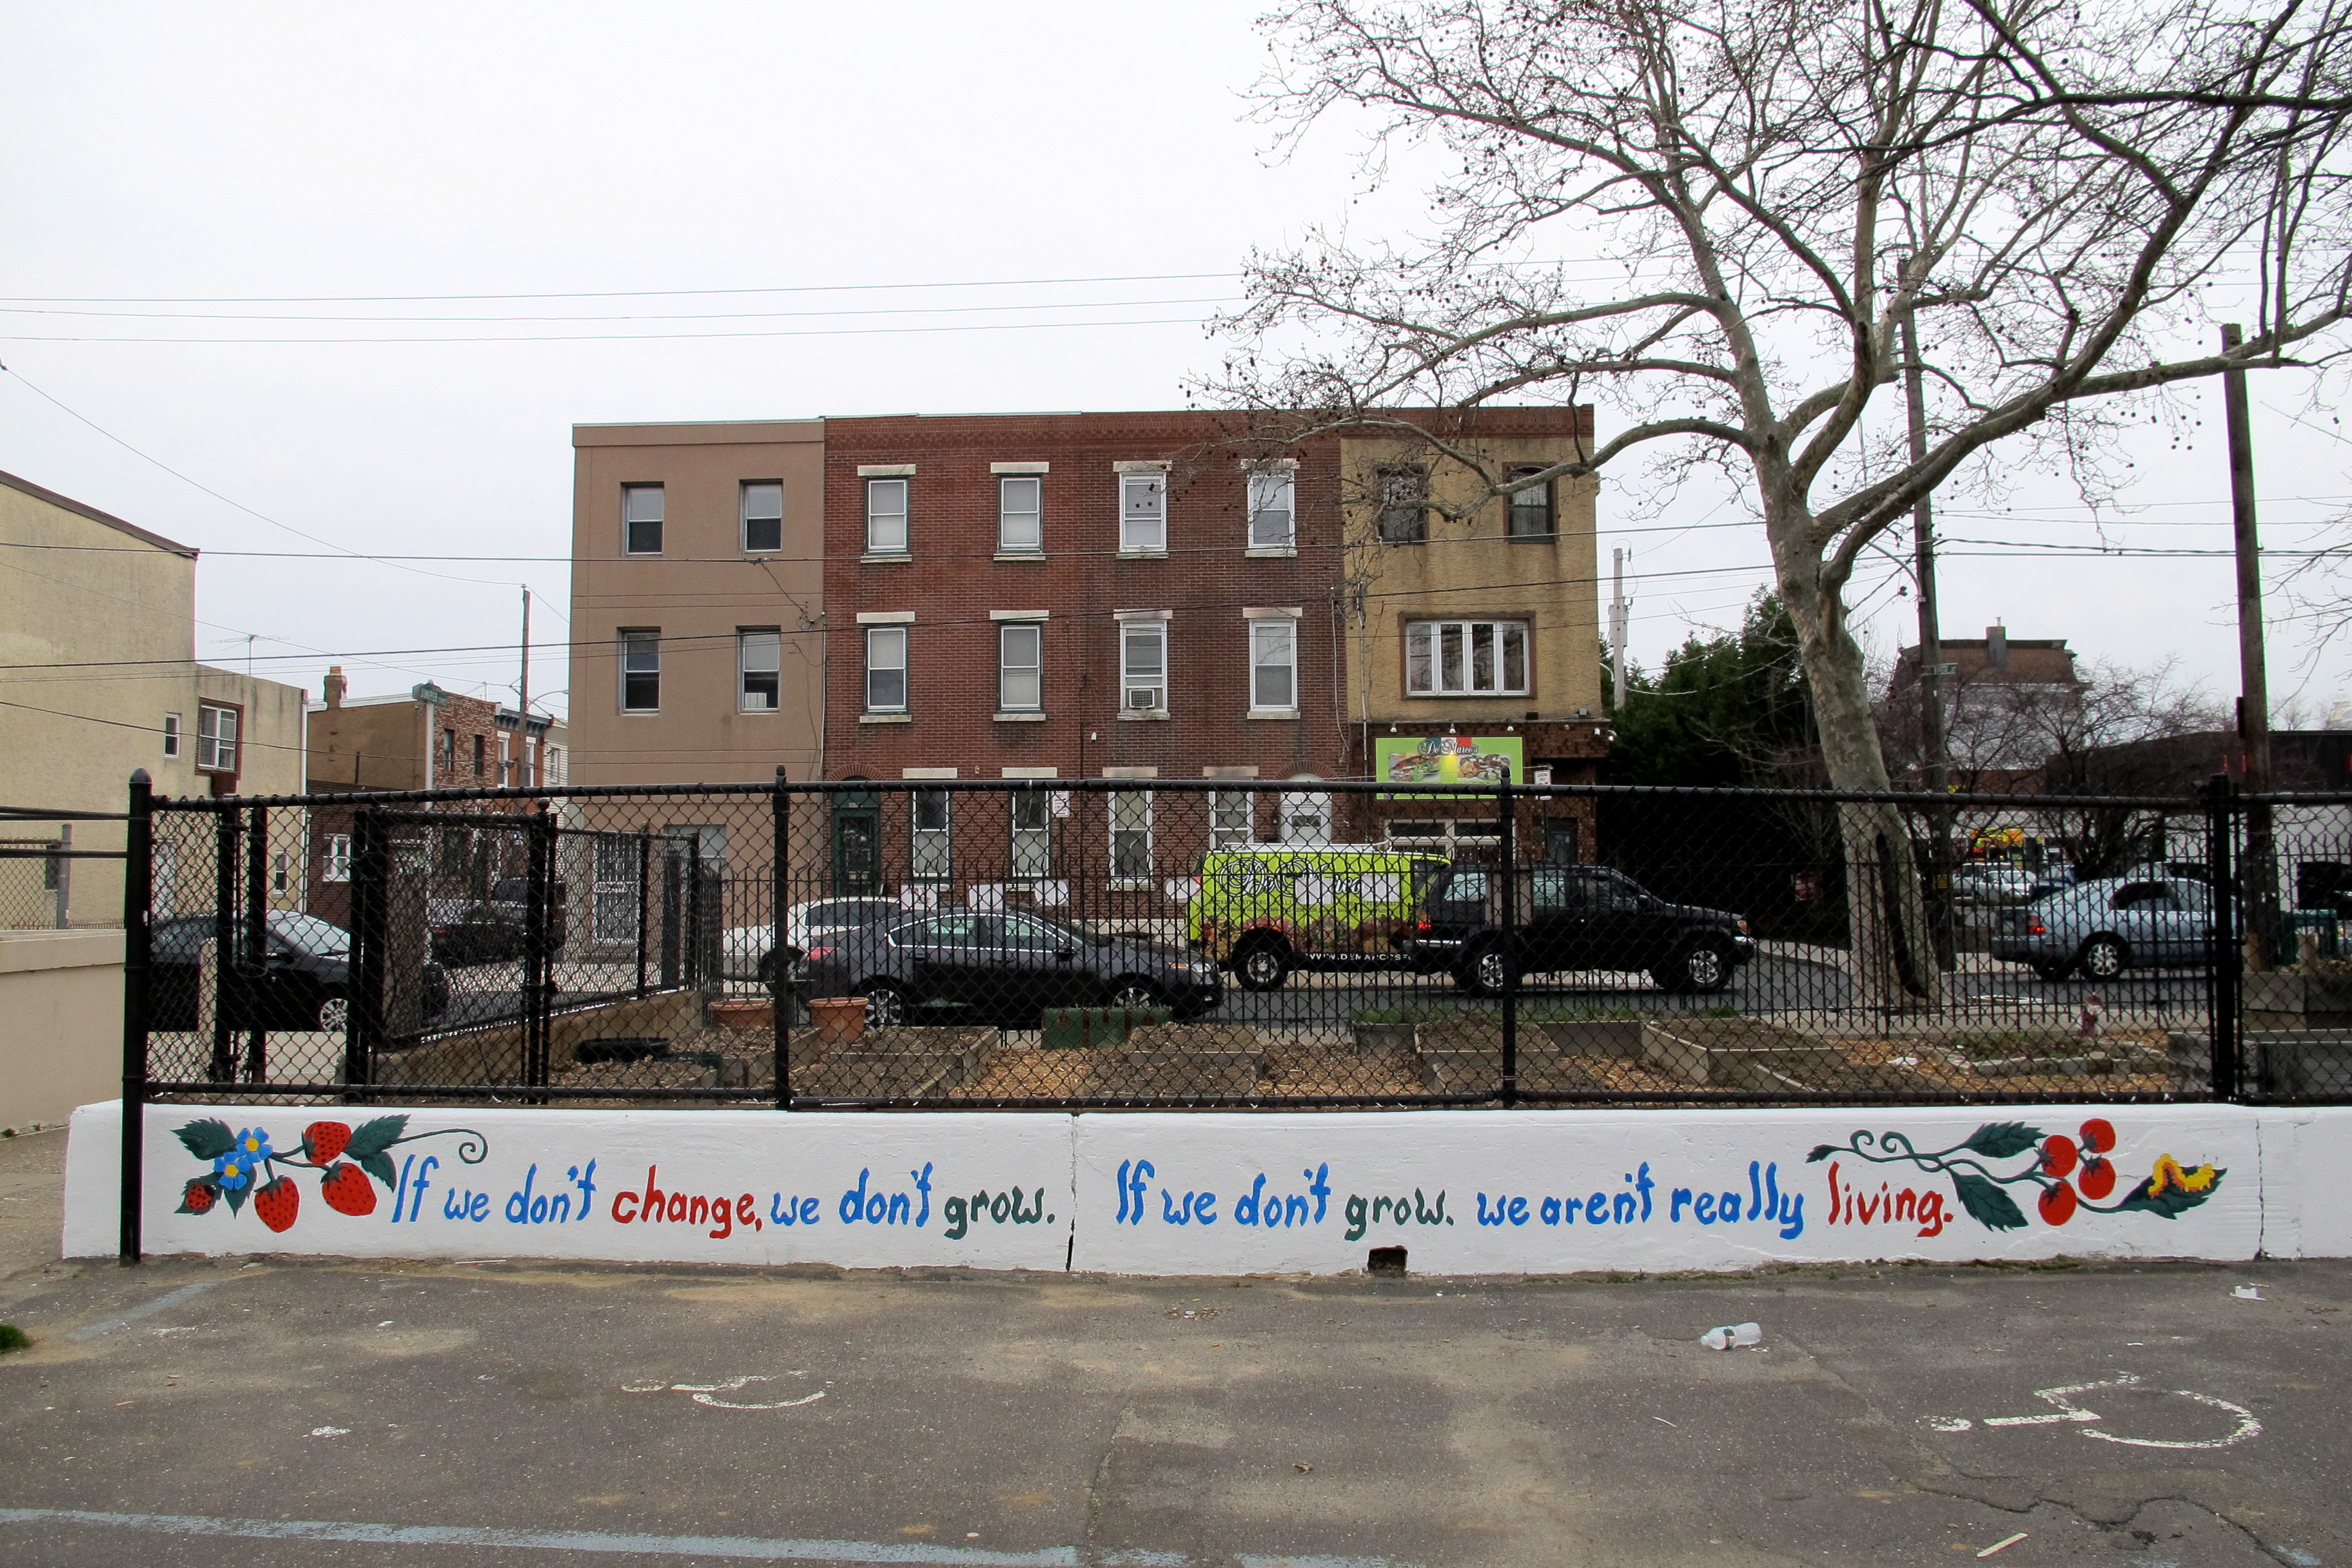 This garden wall was painted by City Year volunteers during spring break.